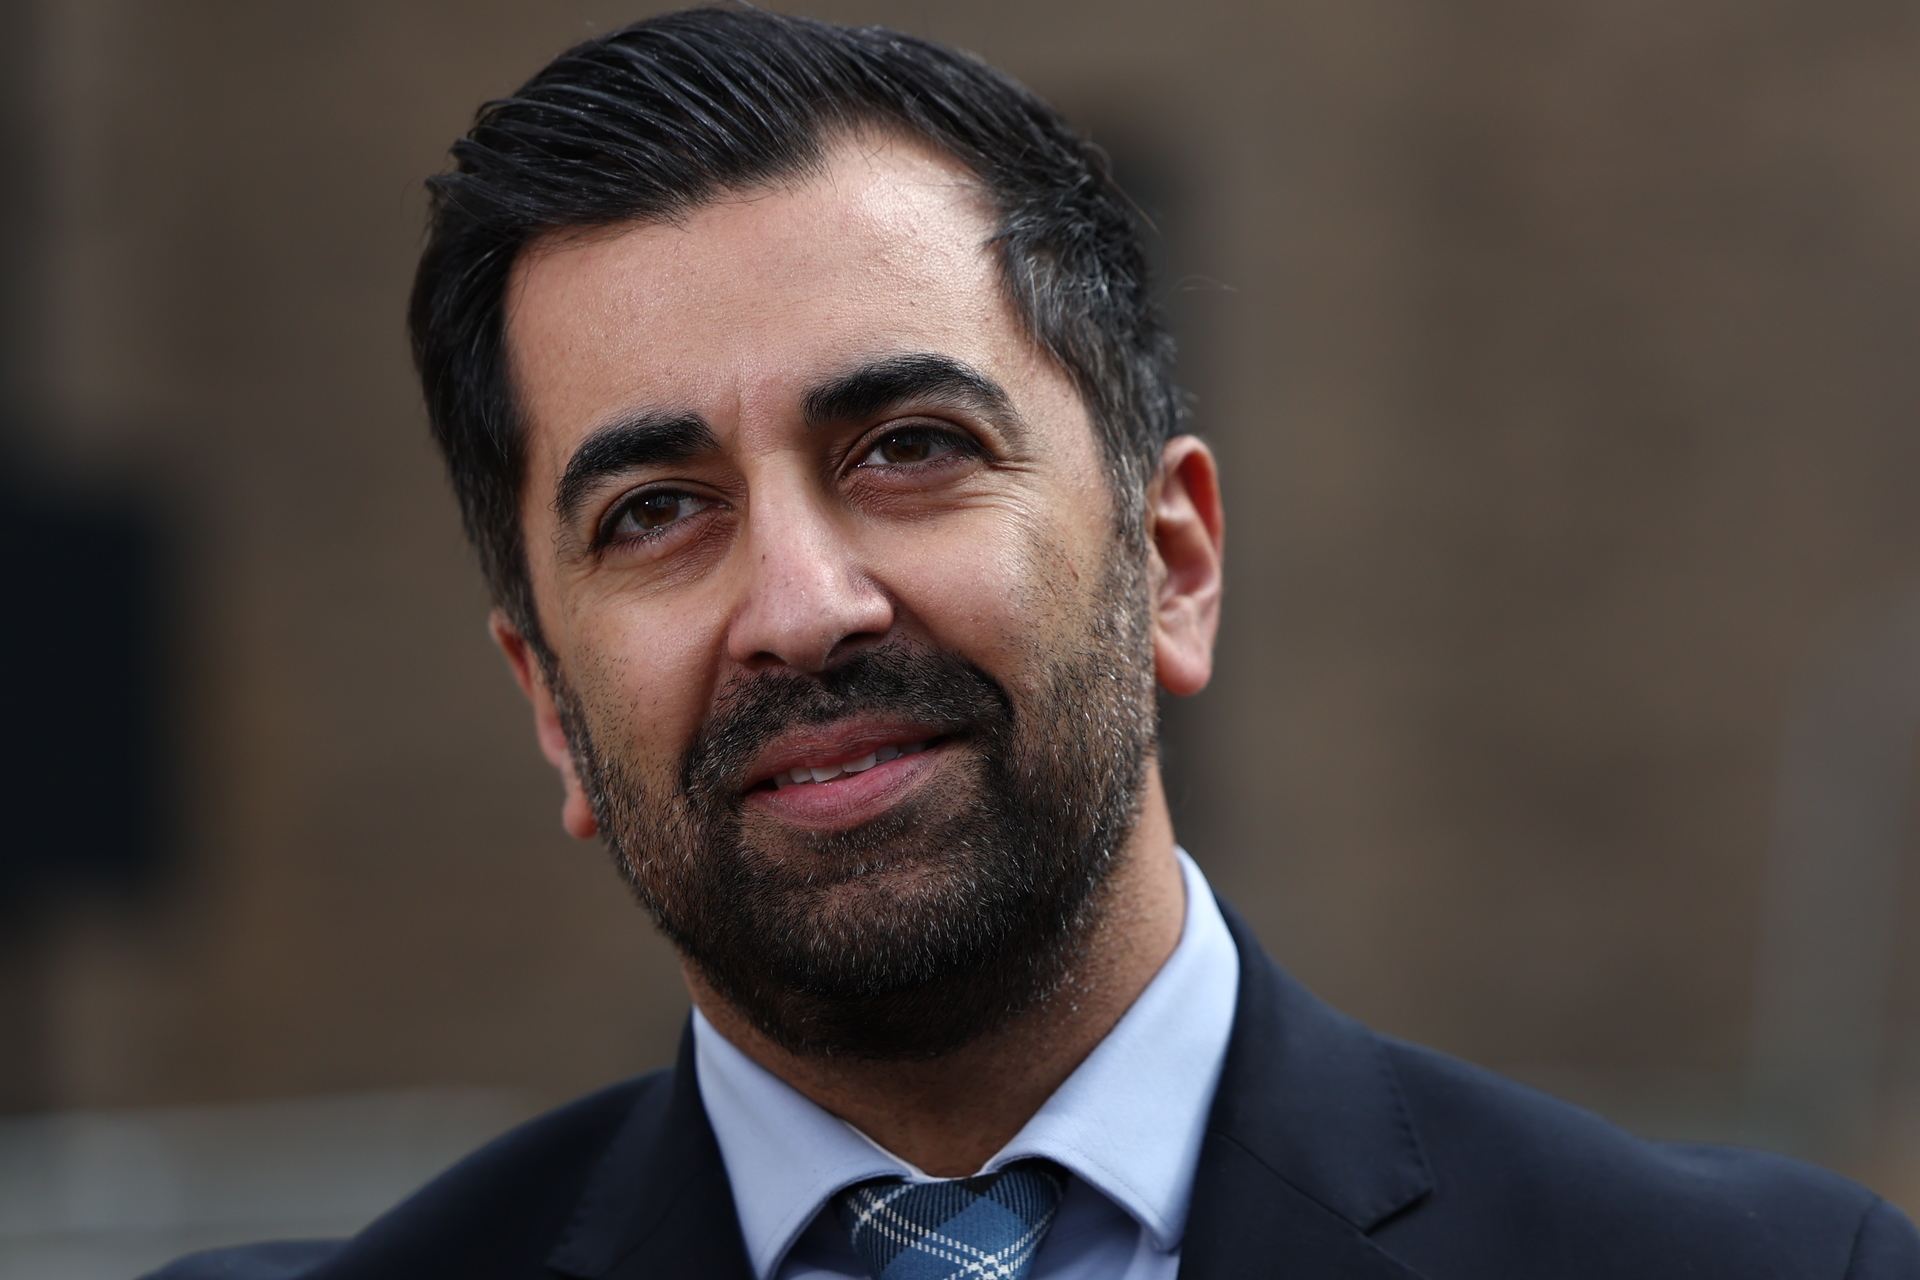 DUNDEE, SCOTLAND - APRIL 26: Scotland's First Minister Humza Yousaf speaks to the media during a visit to a housing development on April 26, 2024 in Dundee, Scotland. The first minister's appearance came as Scottish opposition parties called for a no confidence vote following the collapse of his power-sharing deal with the Green Party